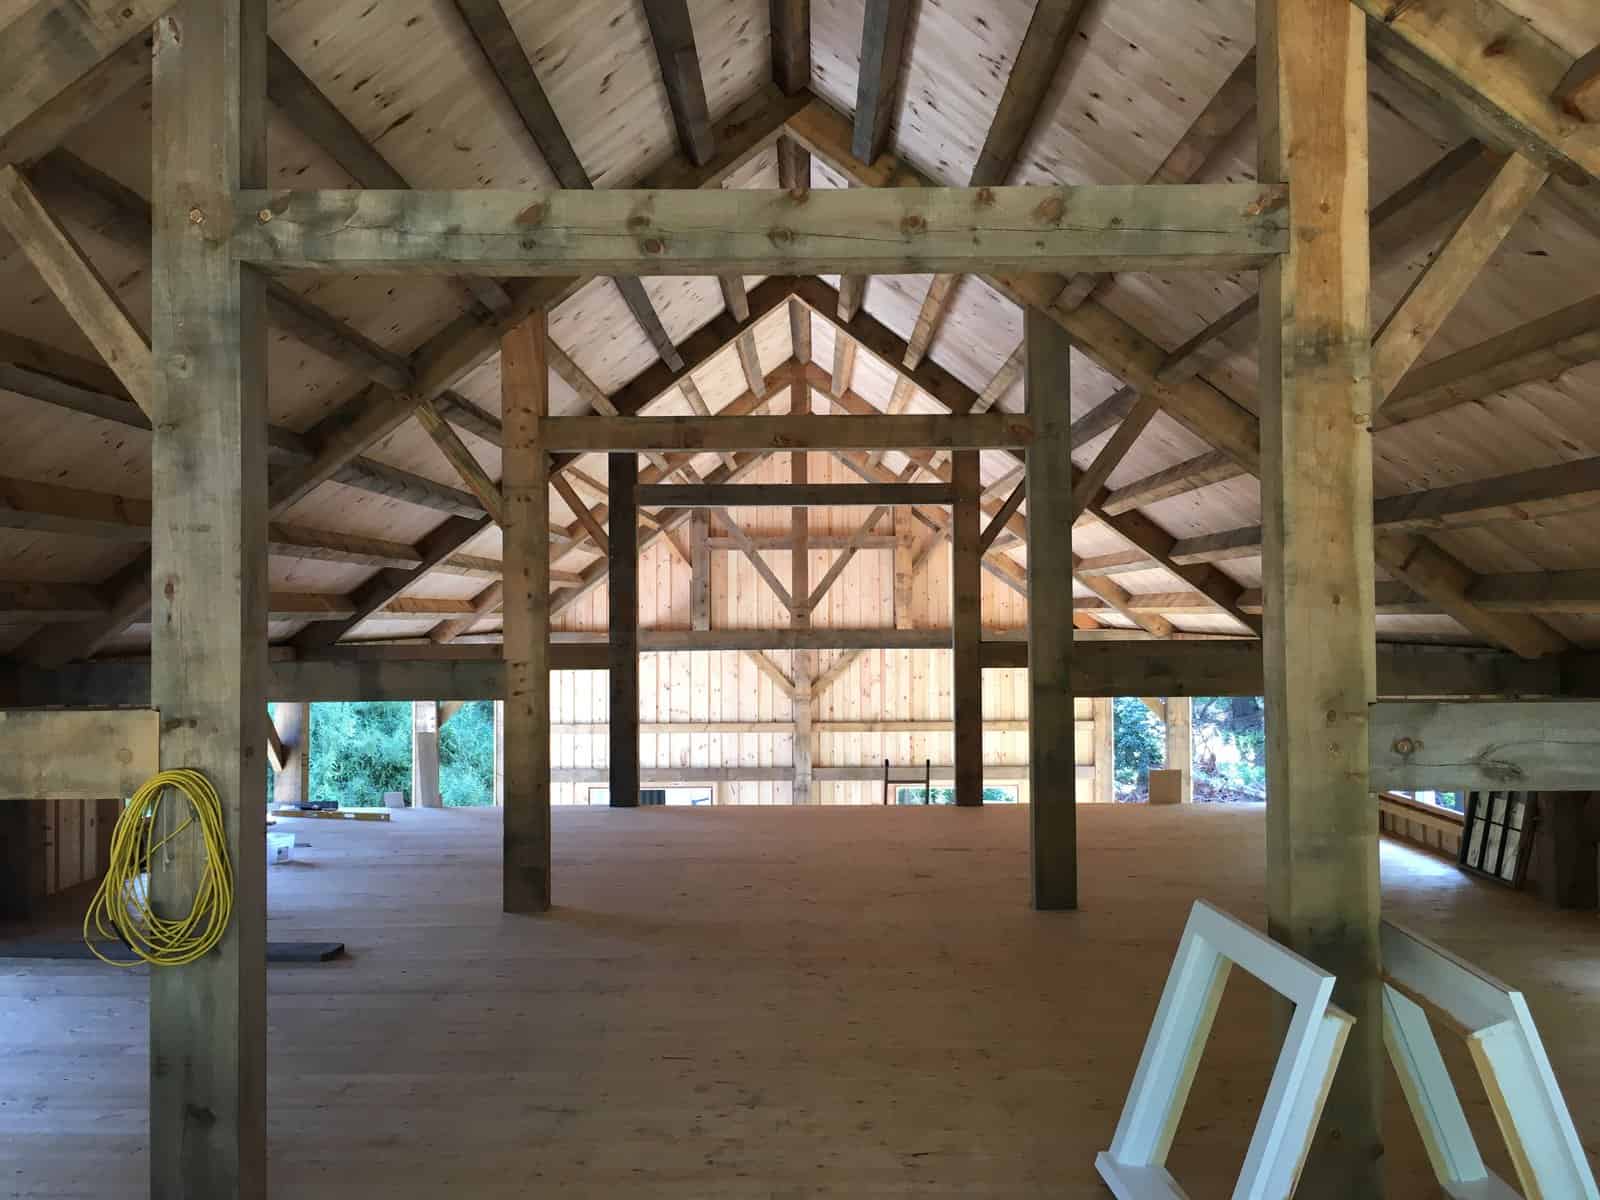 The ibarn hand-cut timber frame was made from trees that were felled on the property.